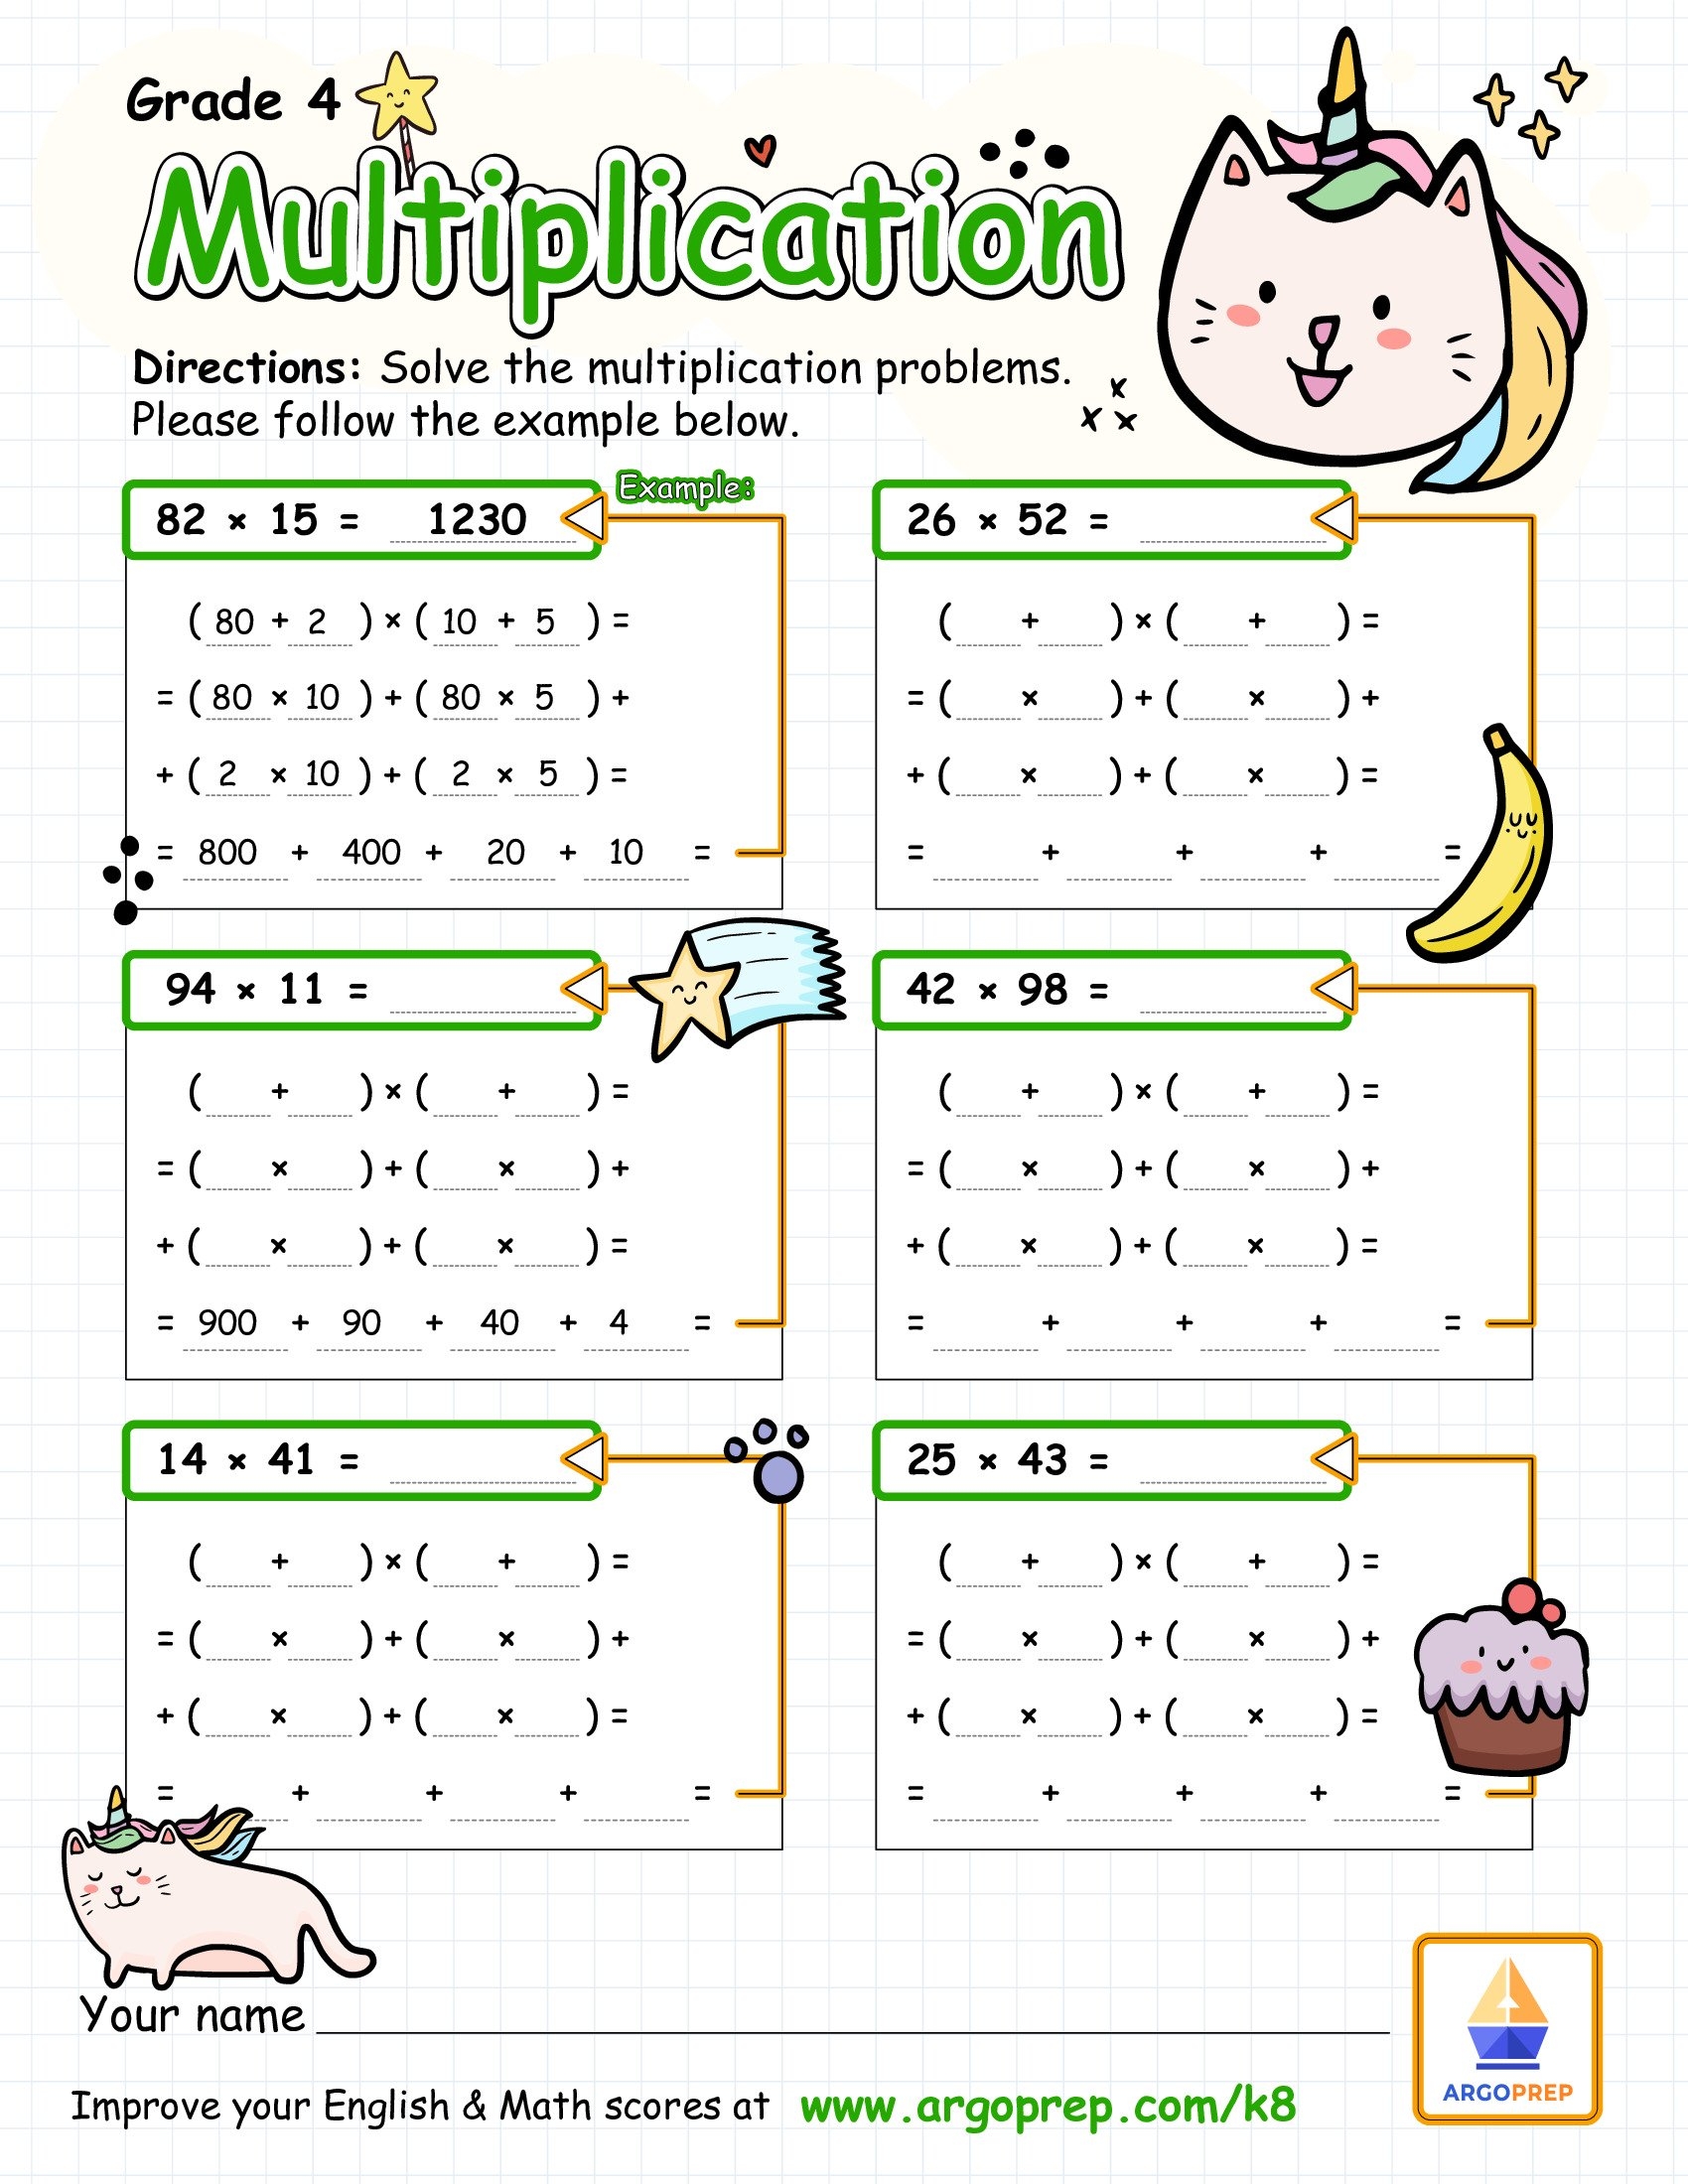 multiplication-with-partial-products-worksheets-printable-worksheets